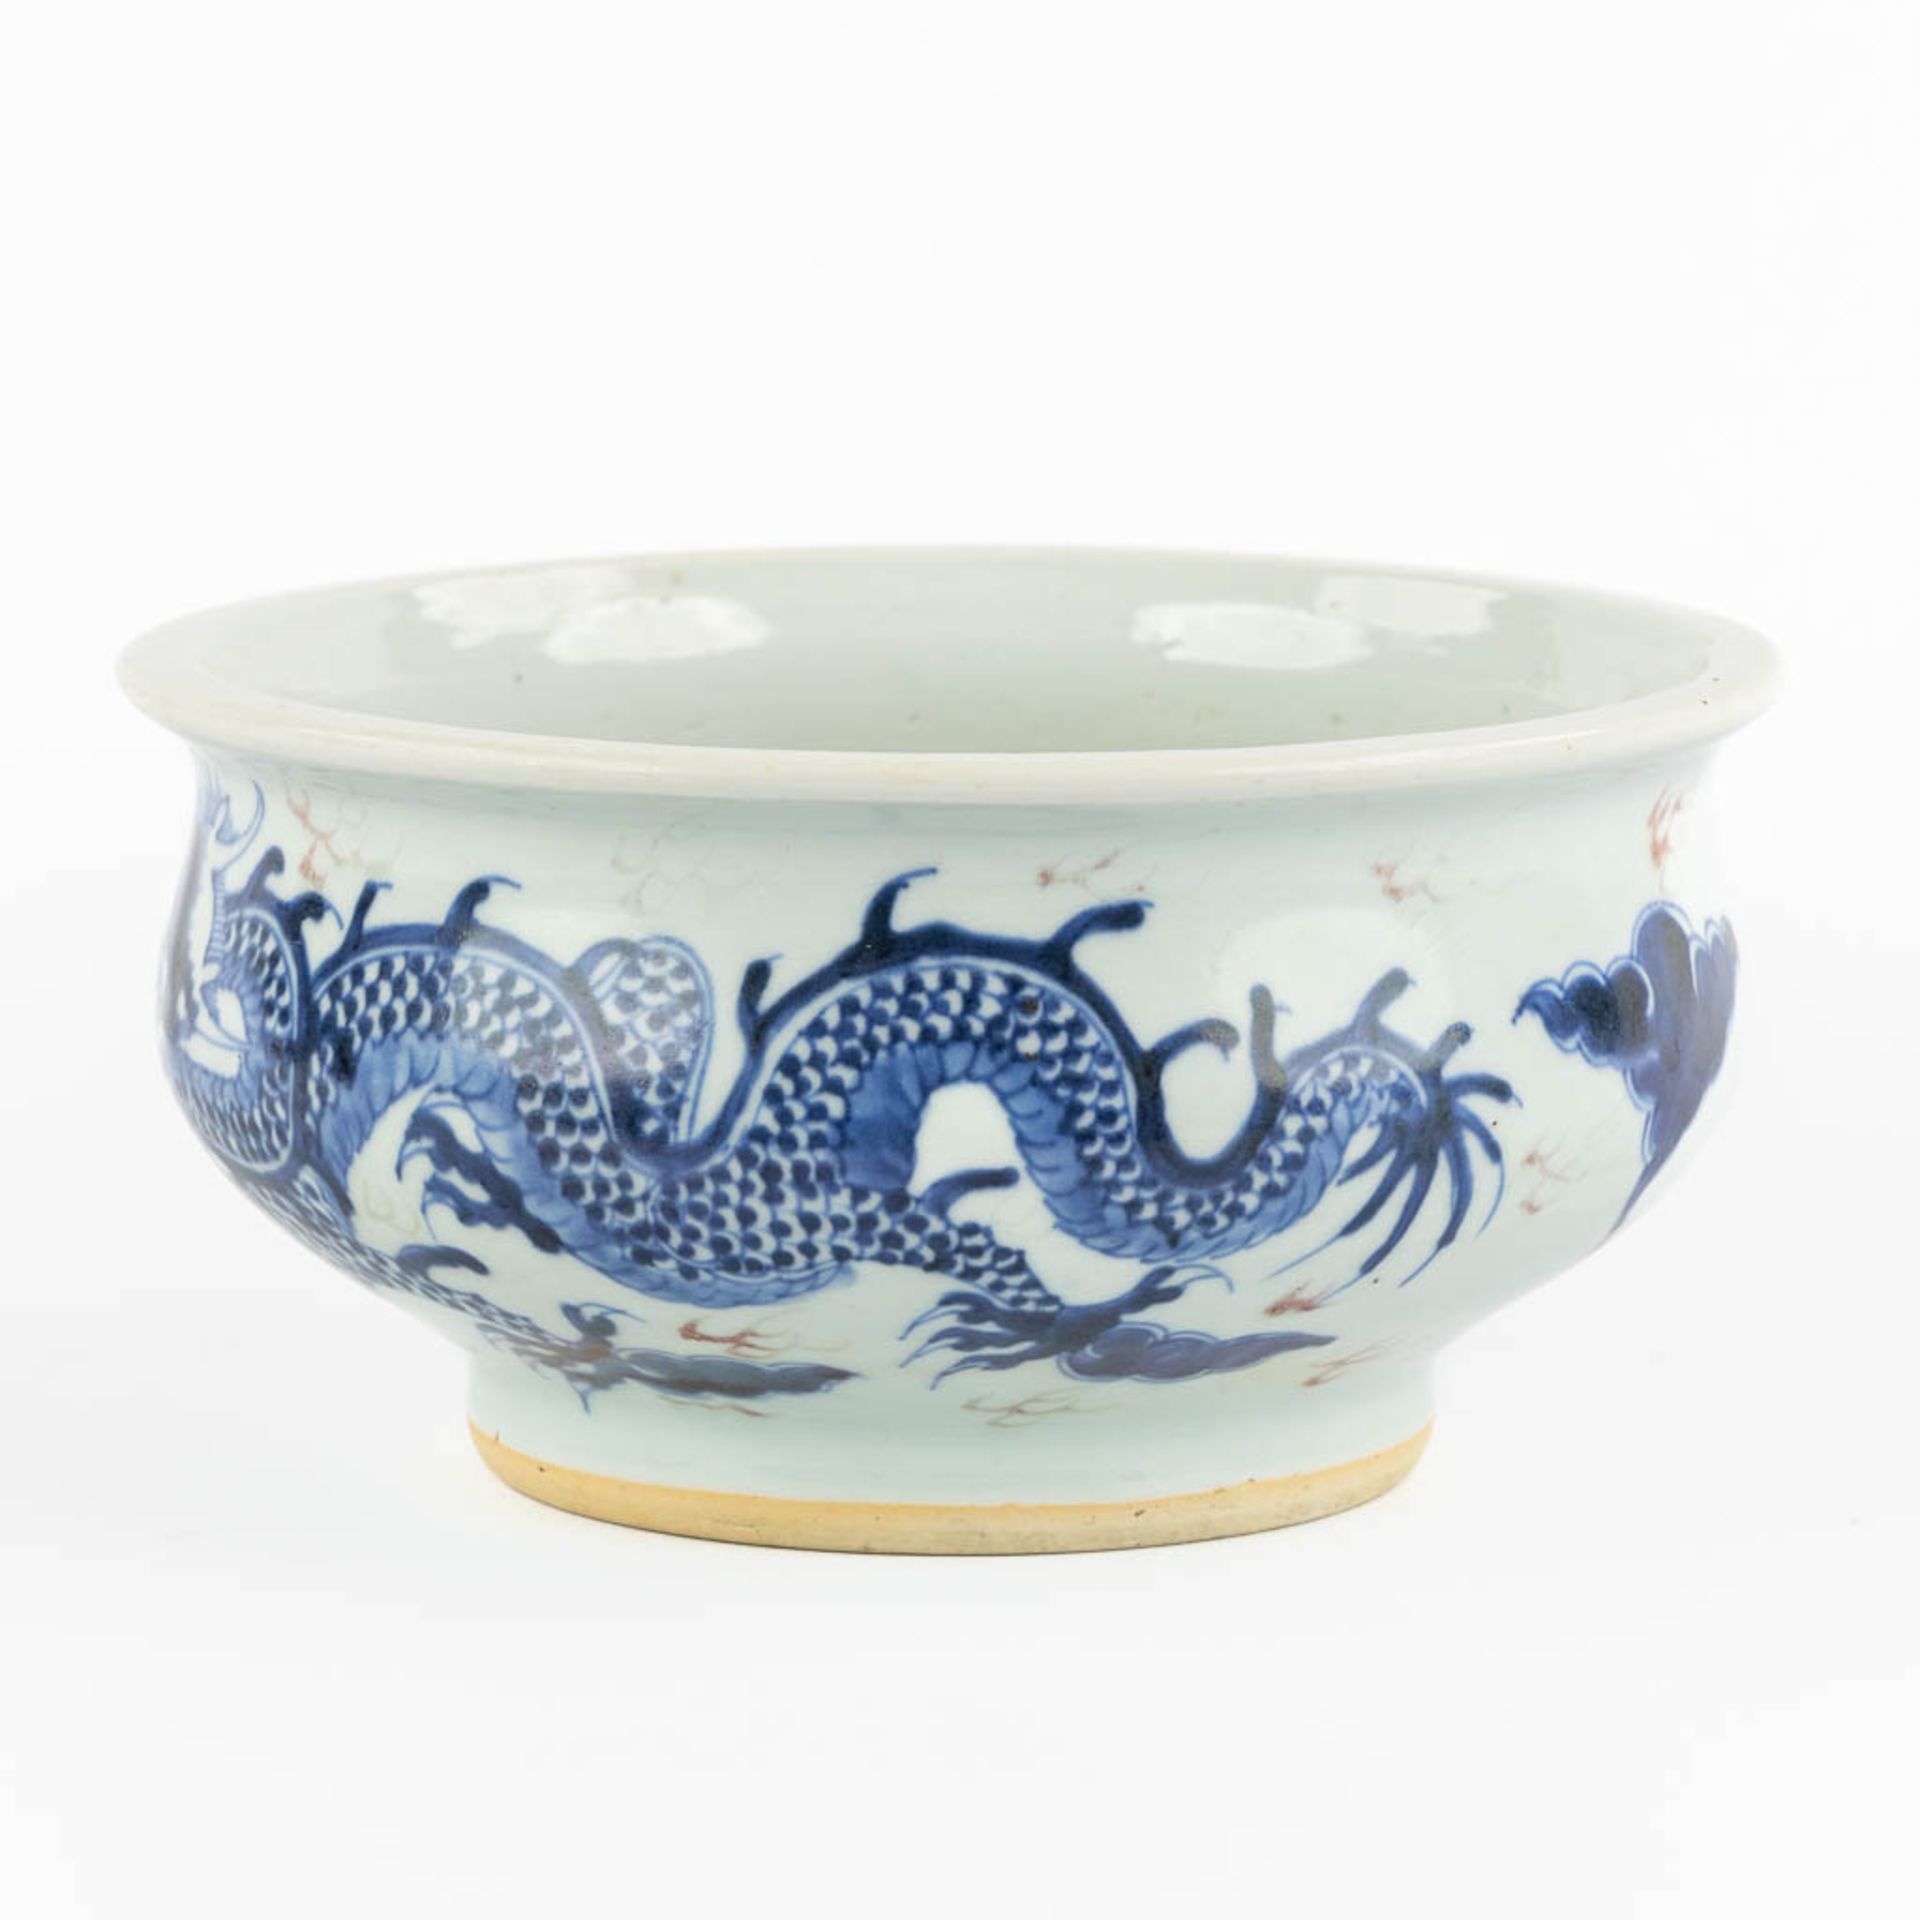 A Chinese cencer with a blue-white and red dragon decor. 19th C. (H:11 x D:21,5 cm) - Image 6 of 11